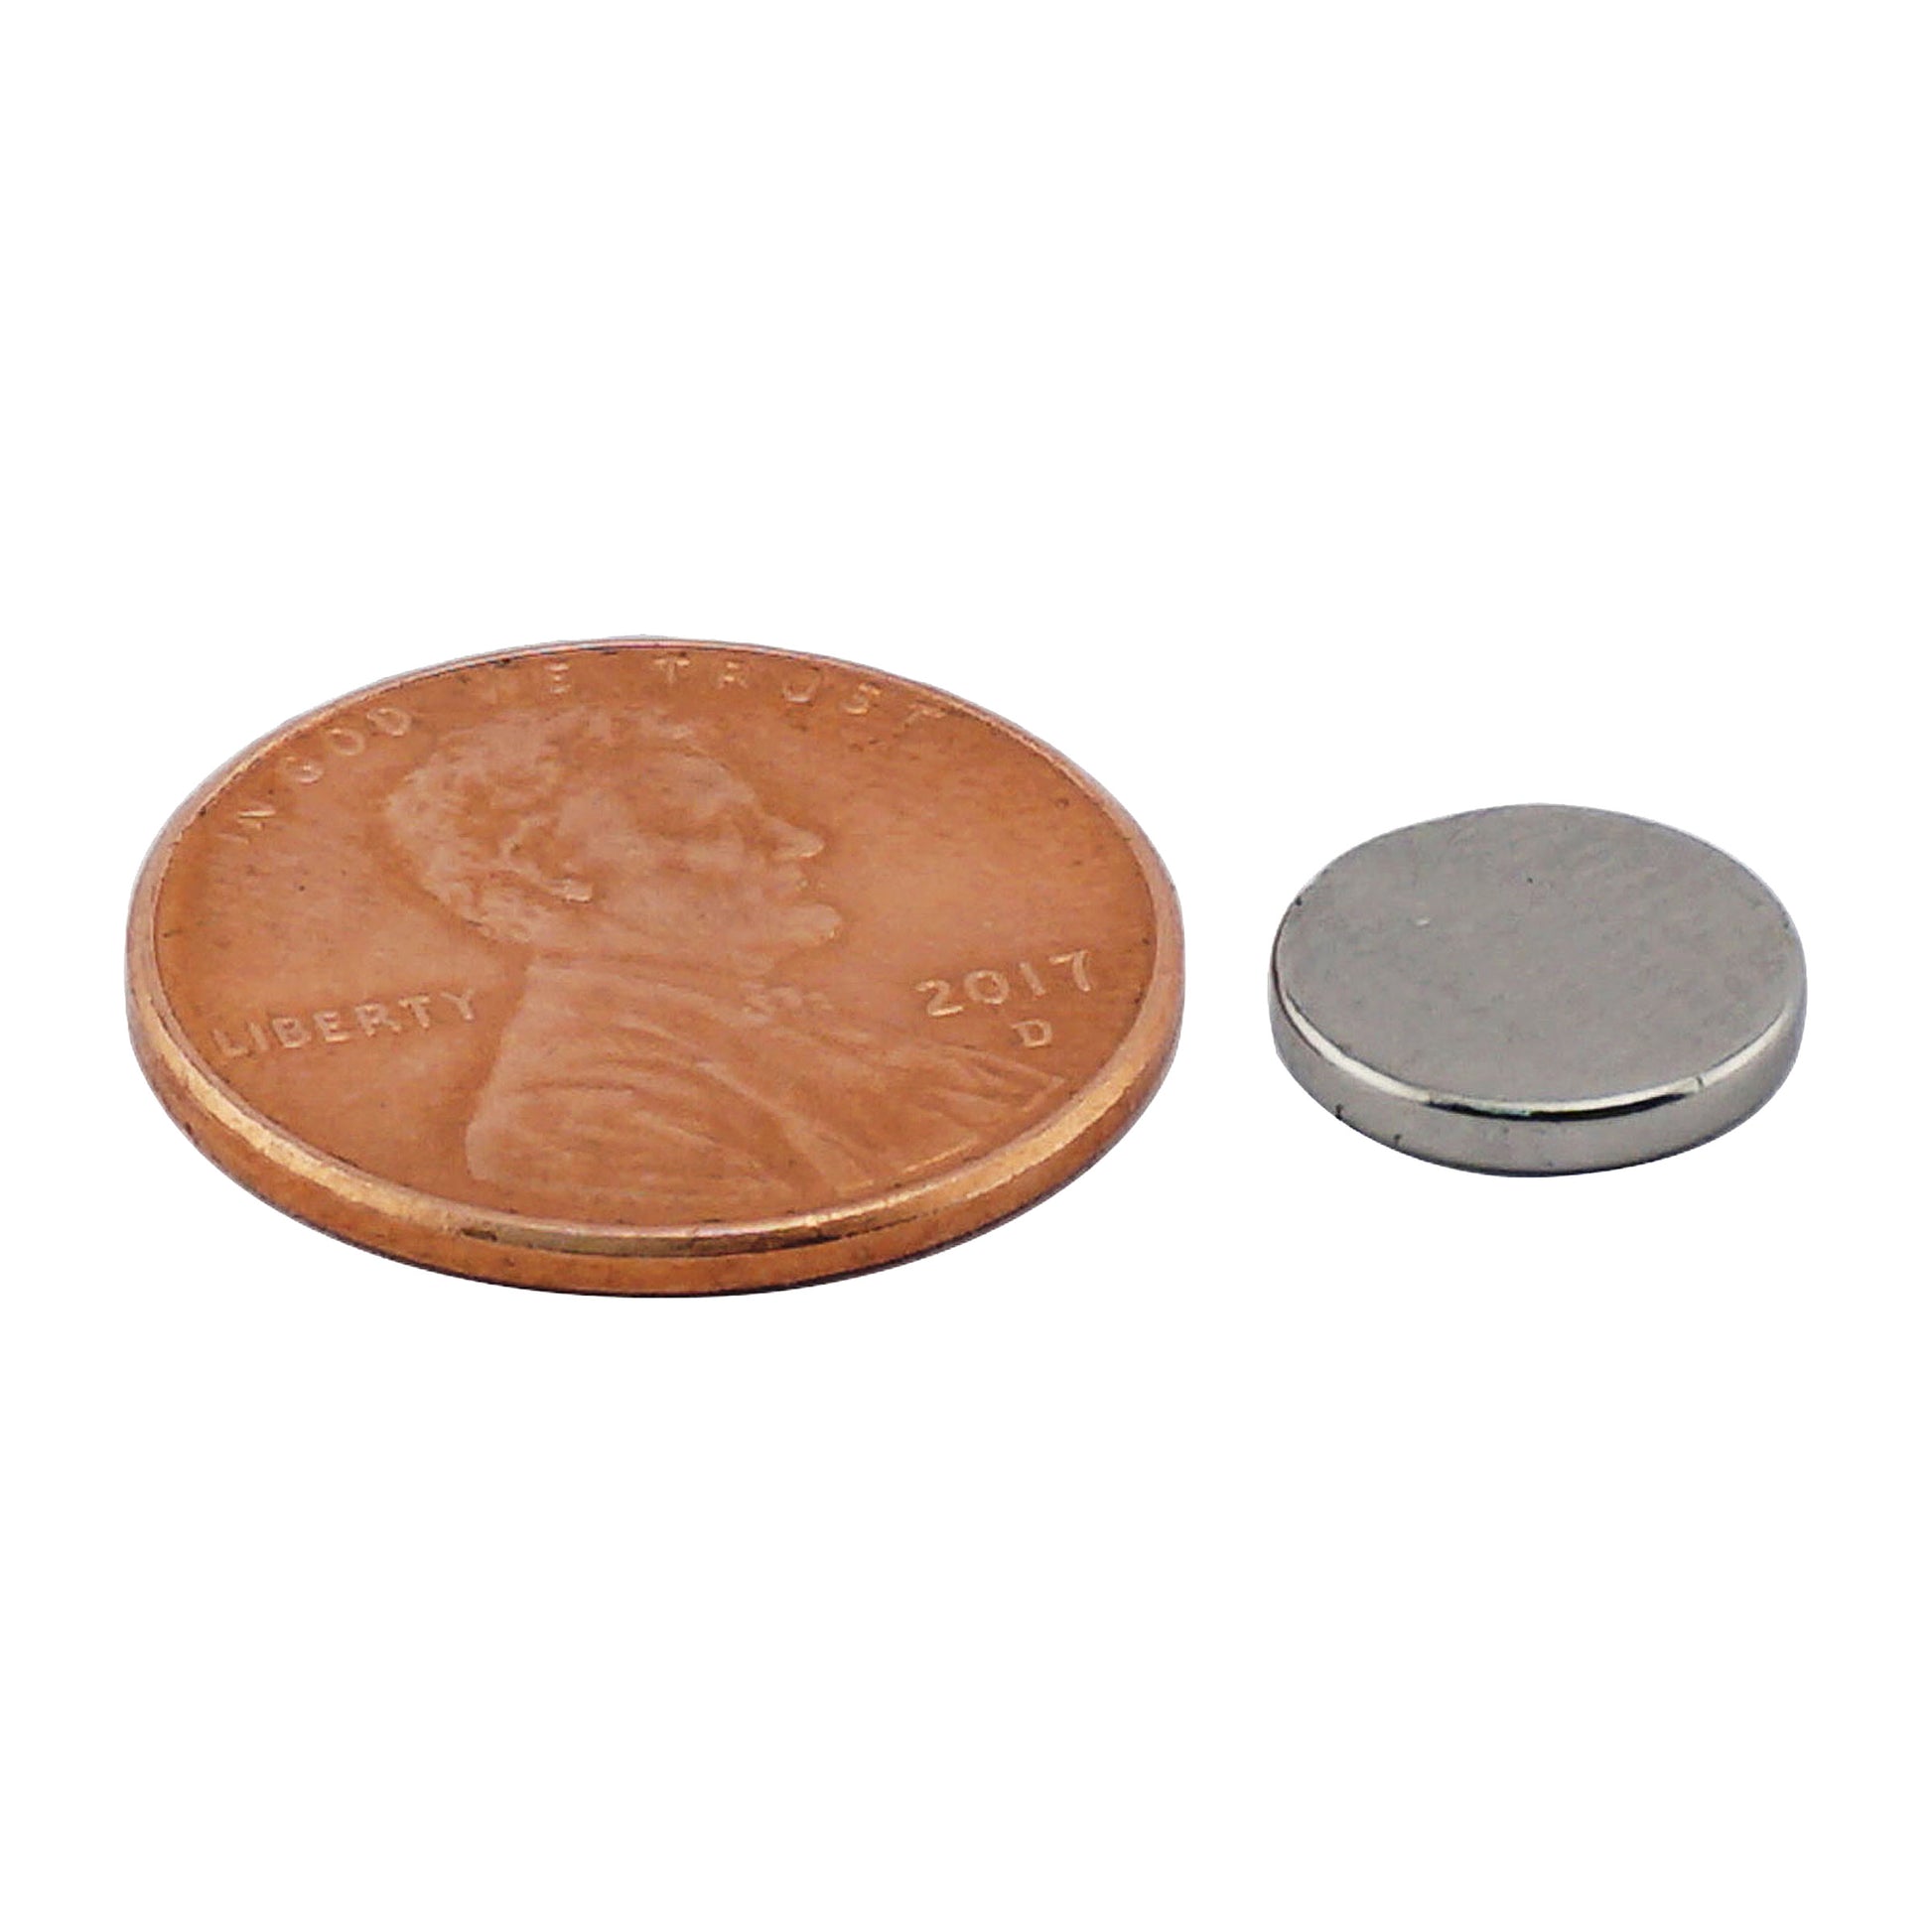 Load image into Gallery viewer, ND45-3706N Neodymium Disc Magnet - Compared to Penny for Size Reference